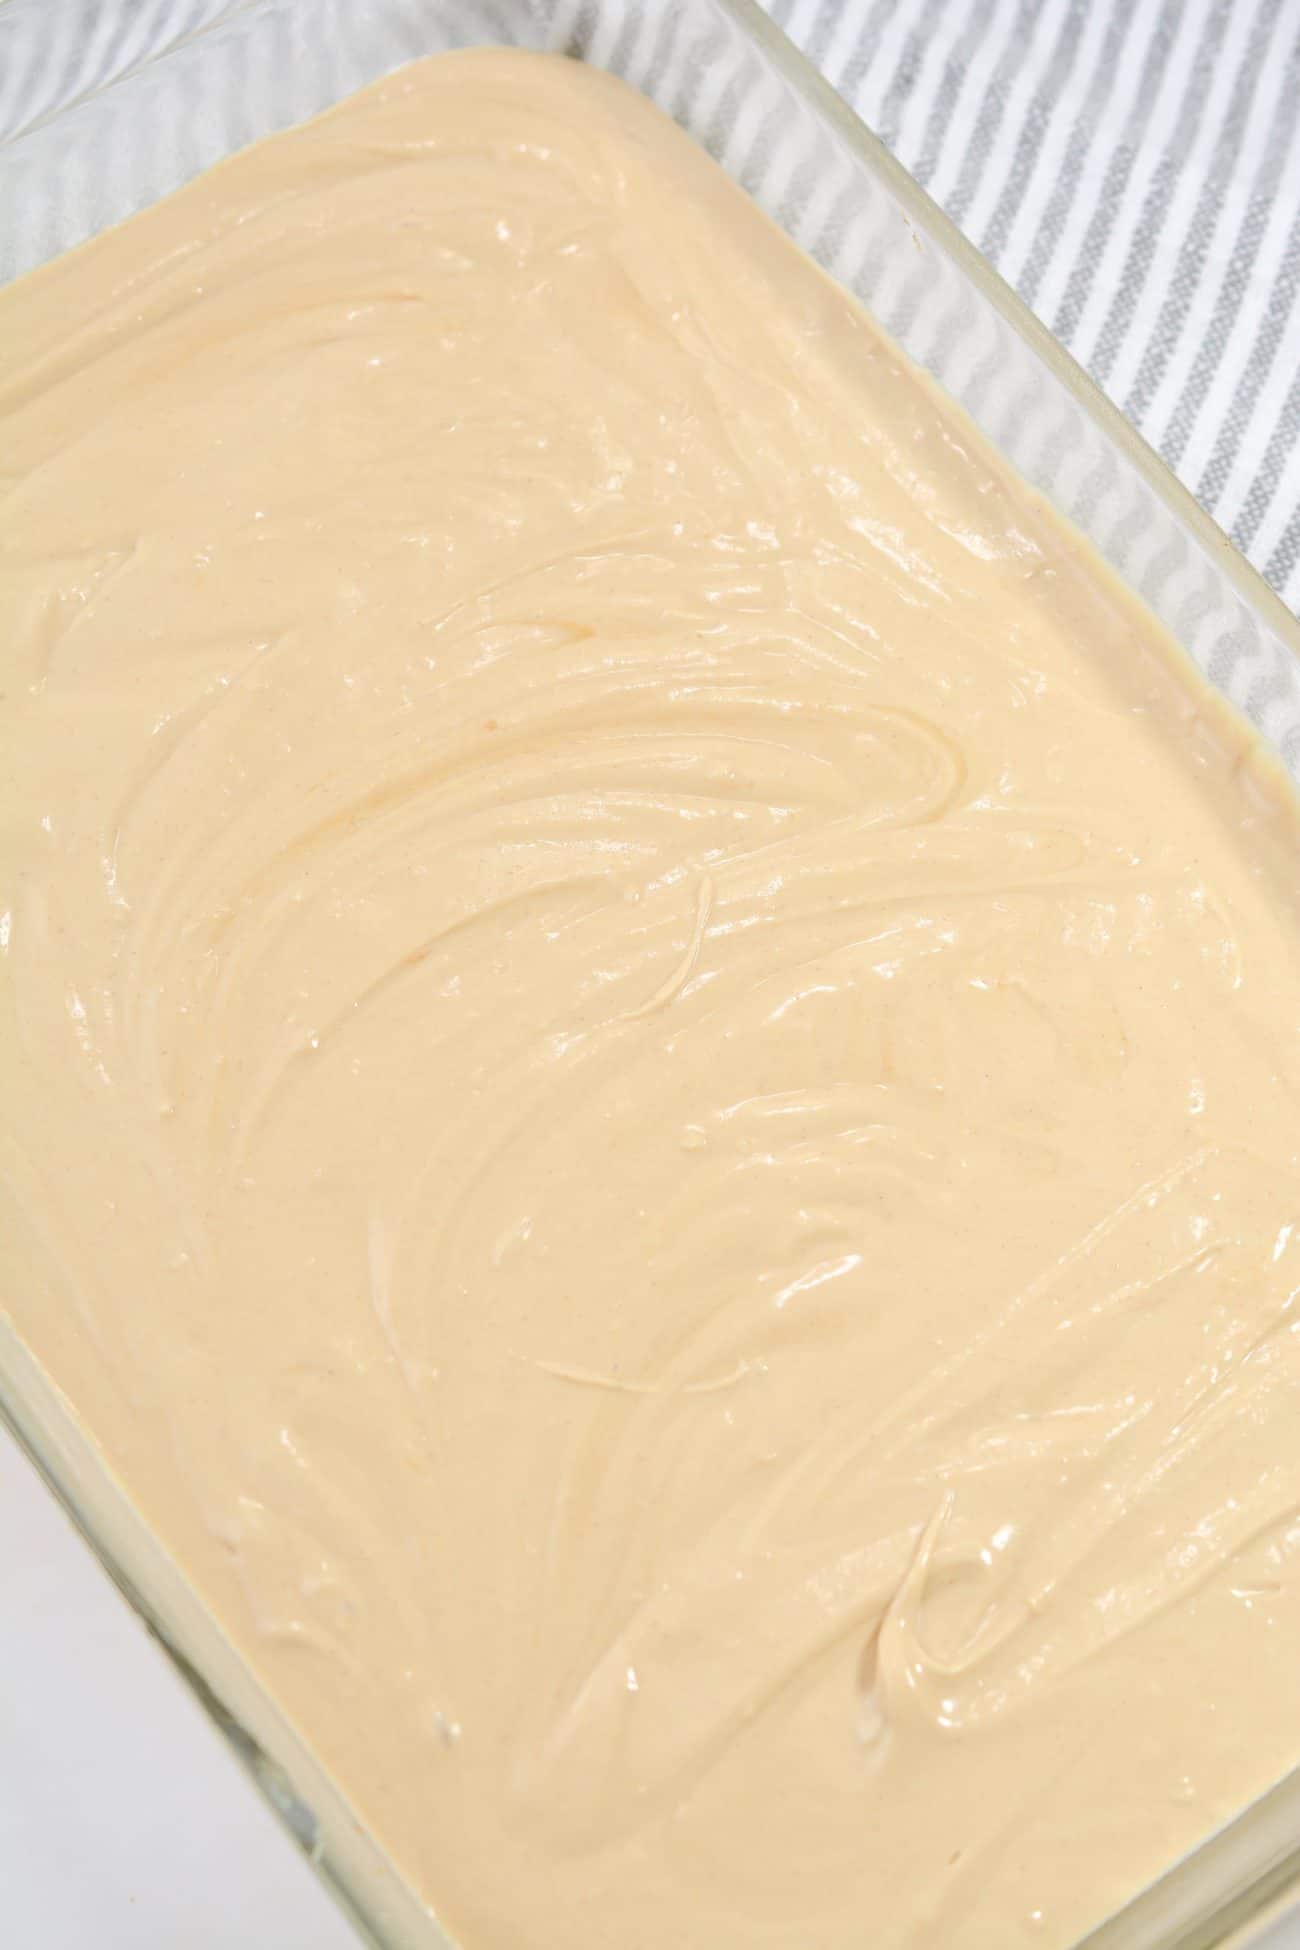 Pour the batter into a well-greased 9x13 baking dish.